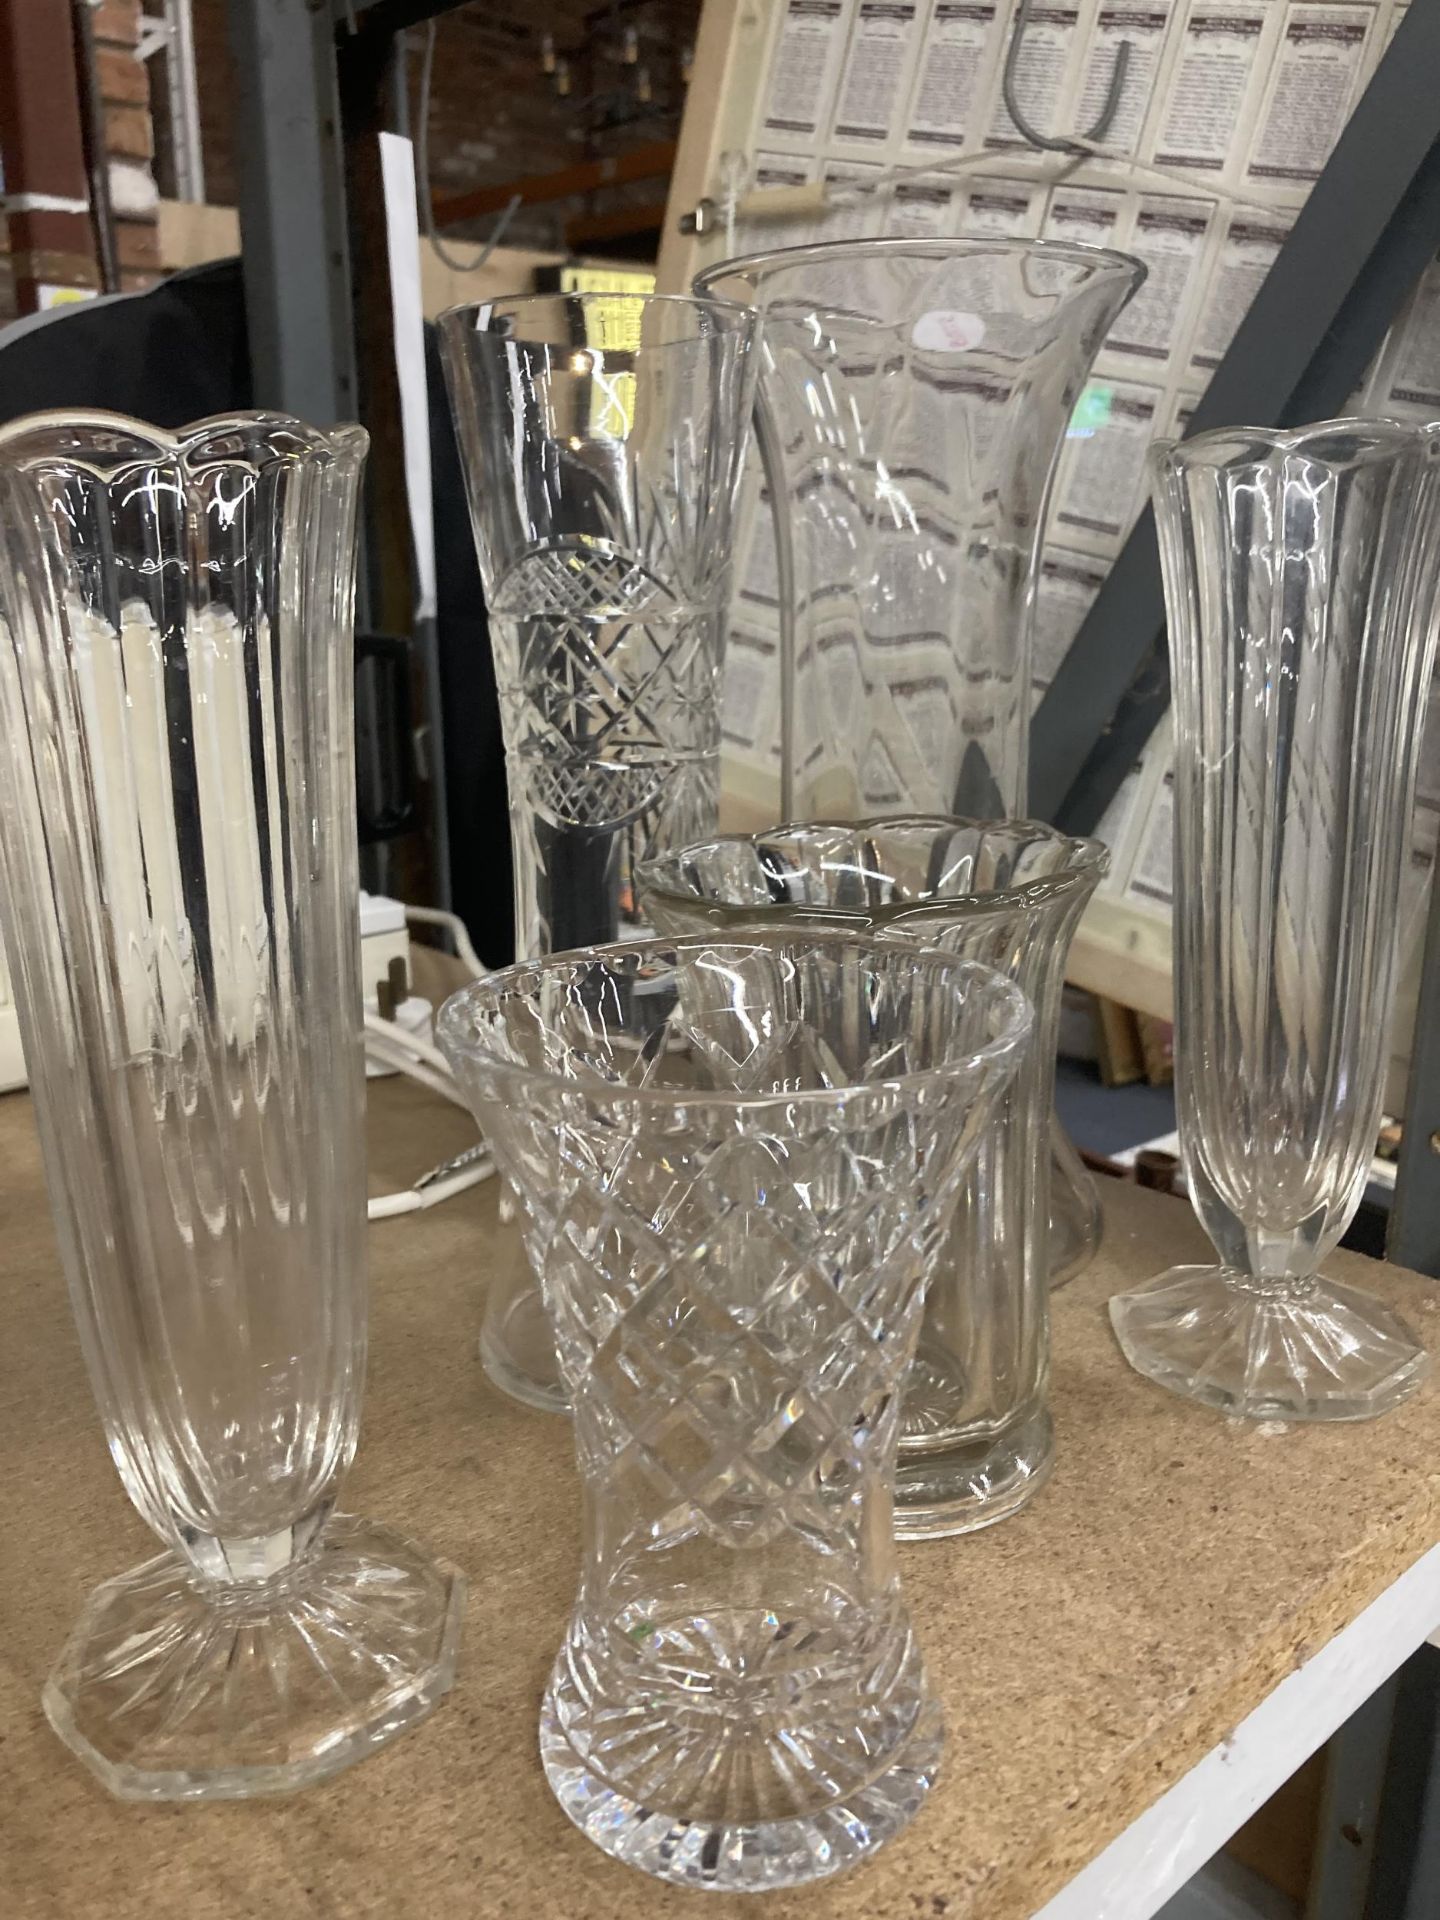 SIX GLASS VASES OF VARYING SIZES - Image 2 of 4